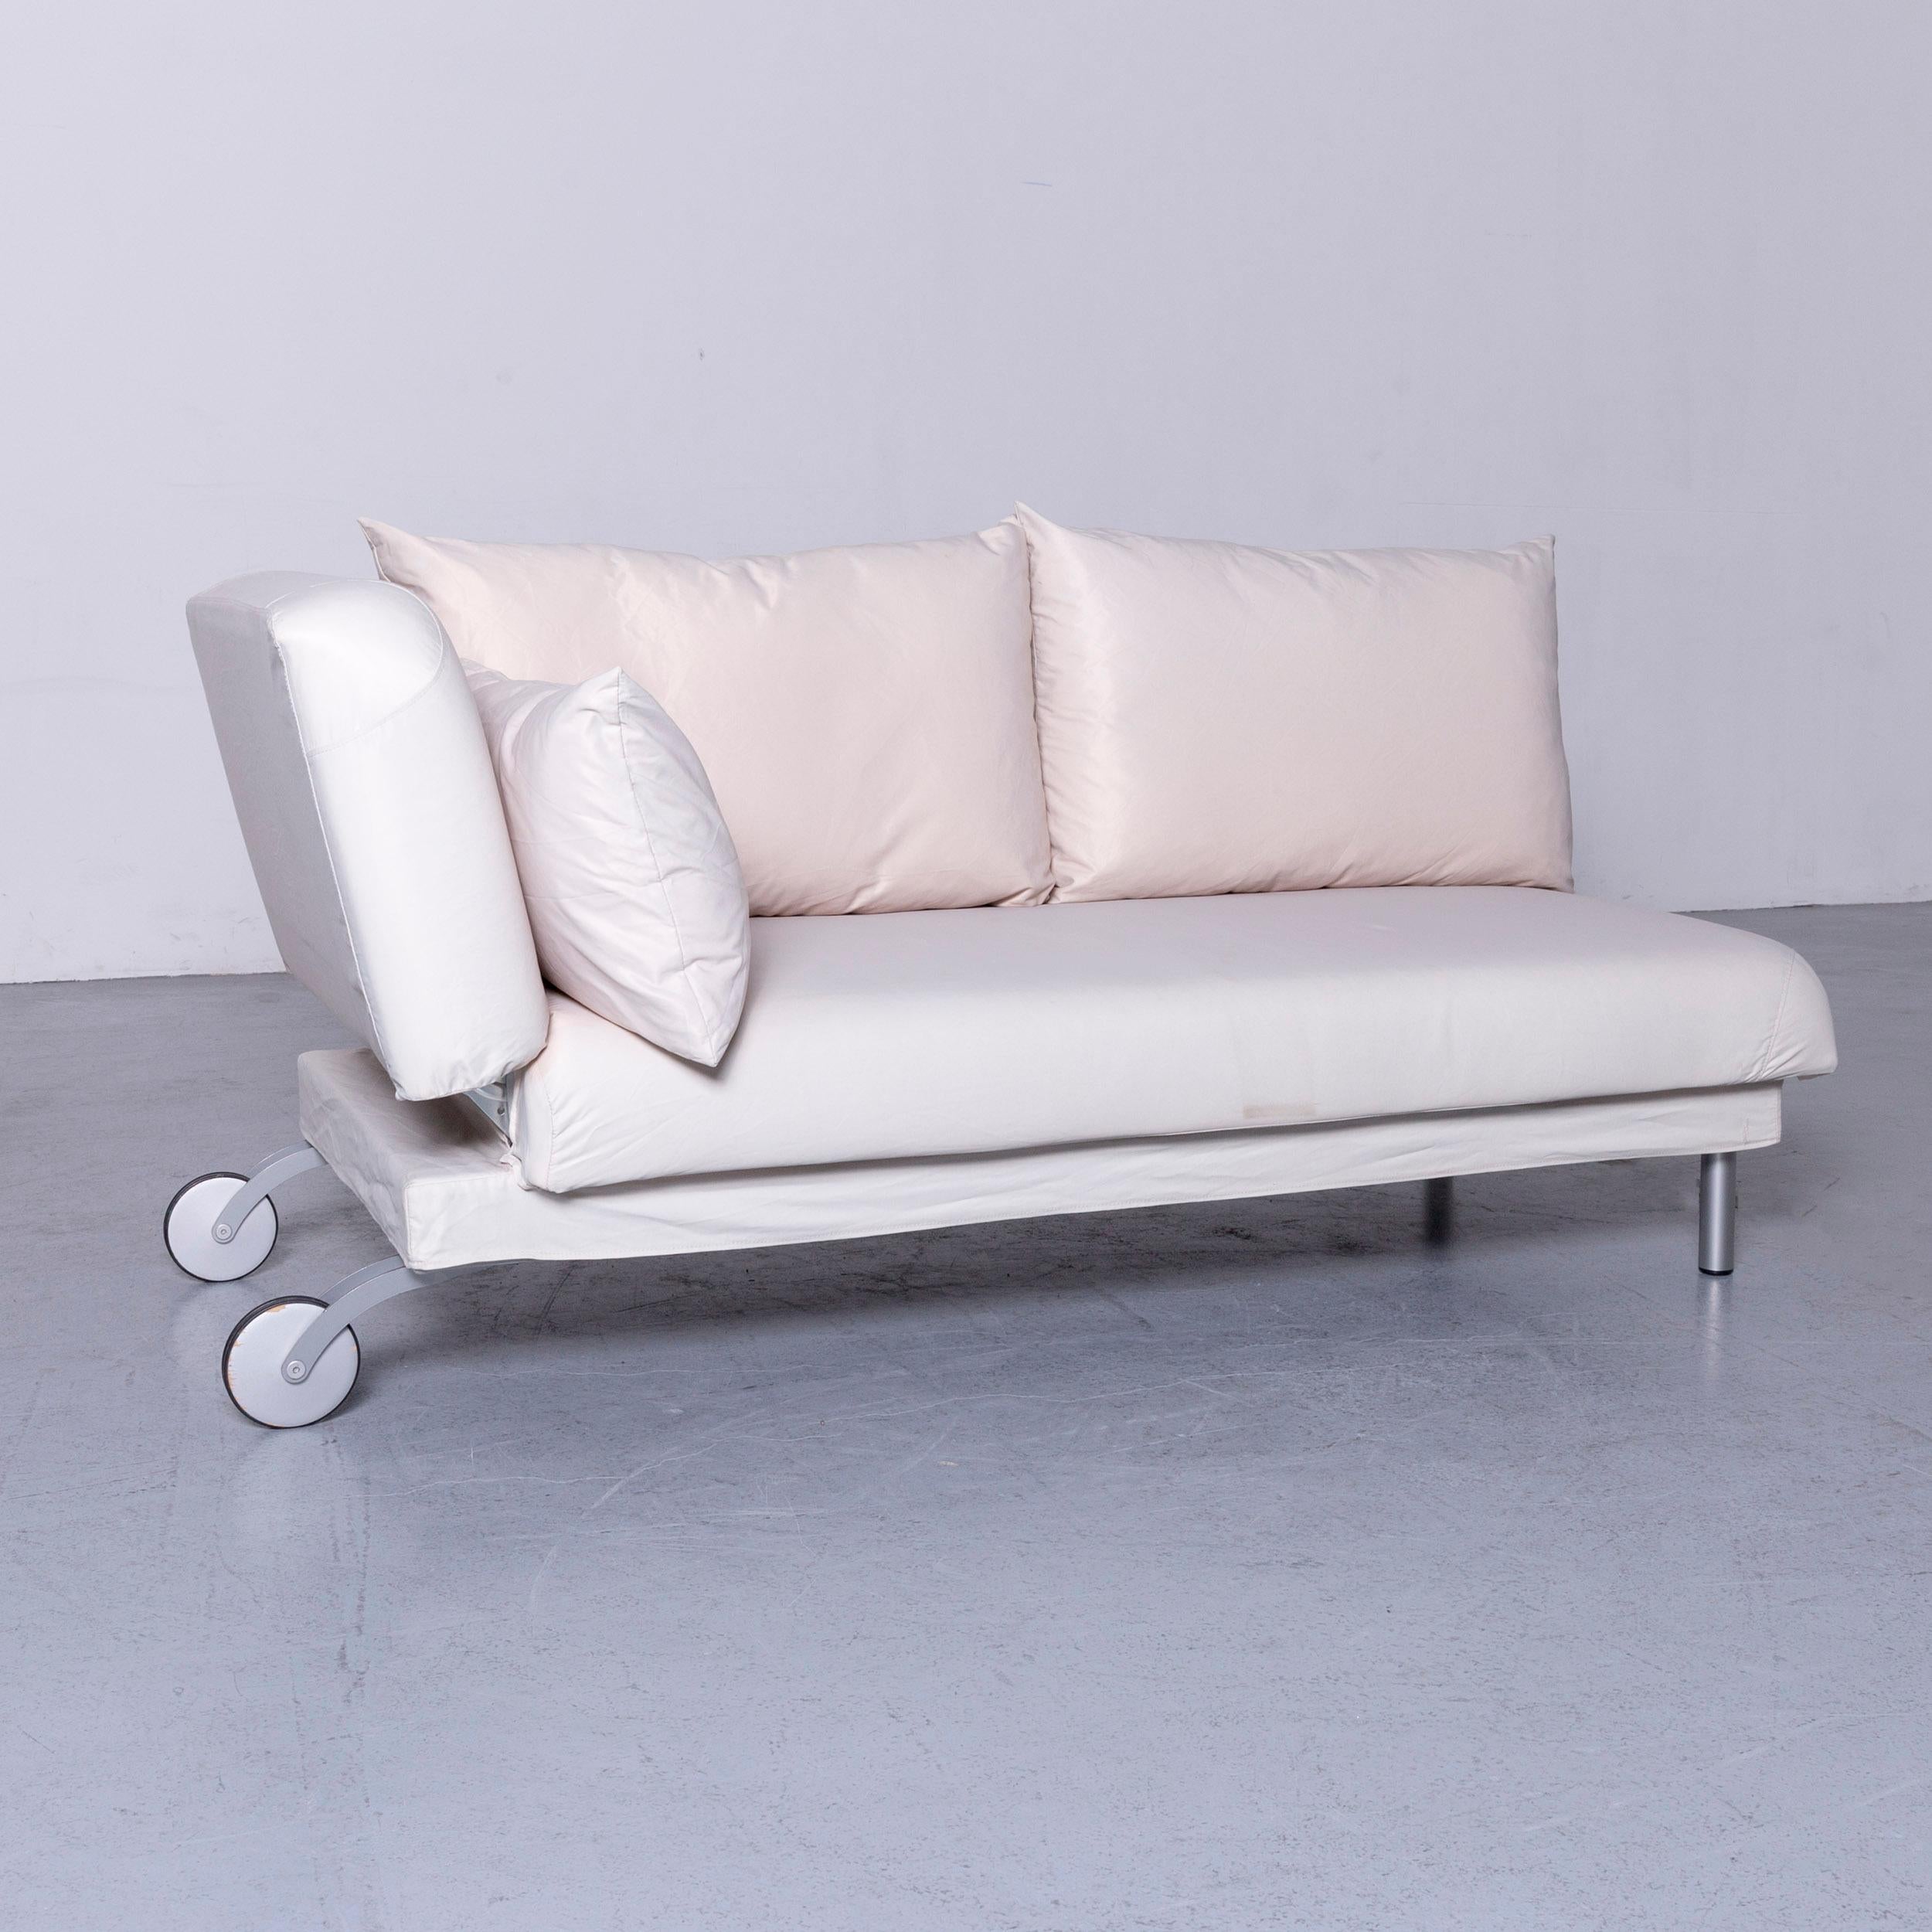 German Brühl & Sippold Four-Two Designer Sofa White Fabric with Function